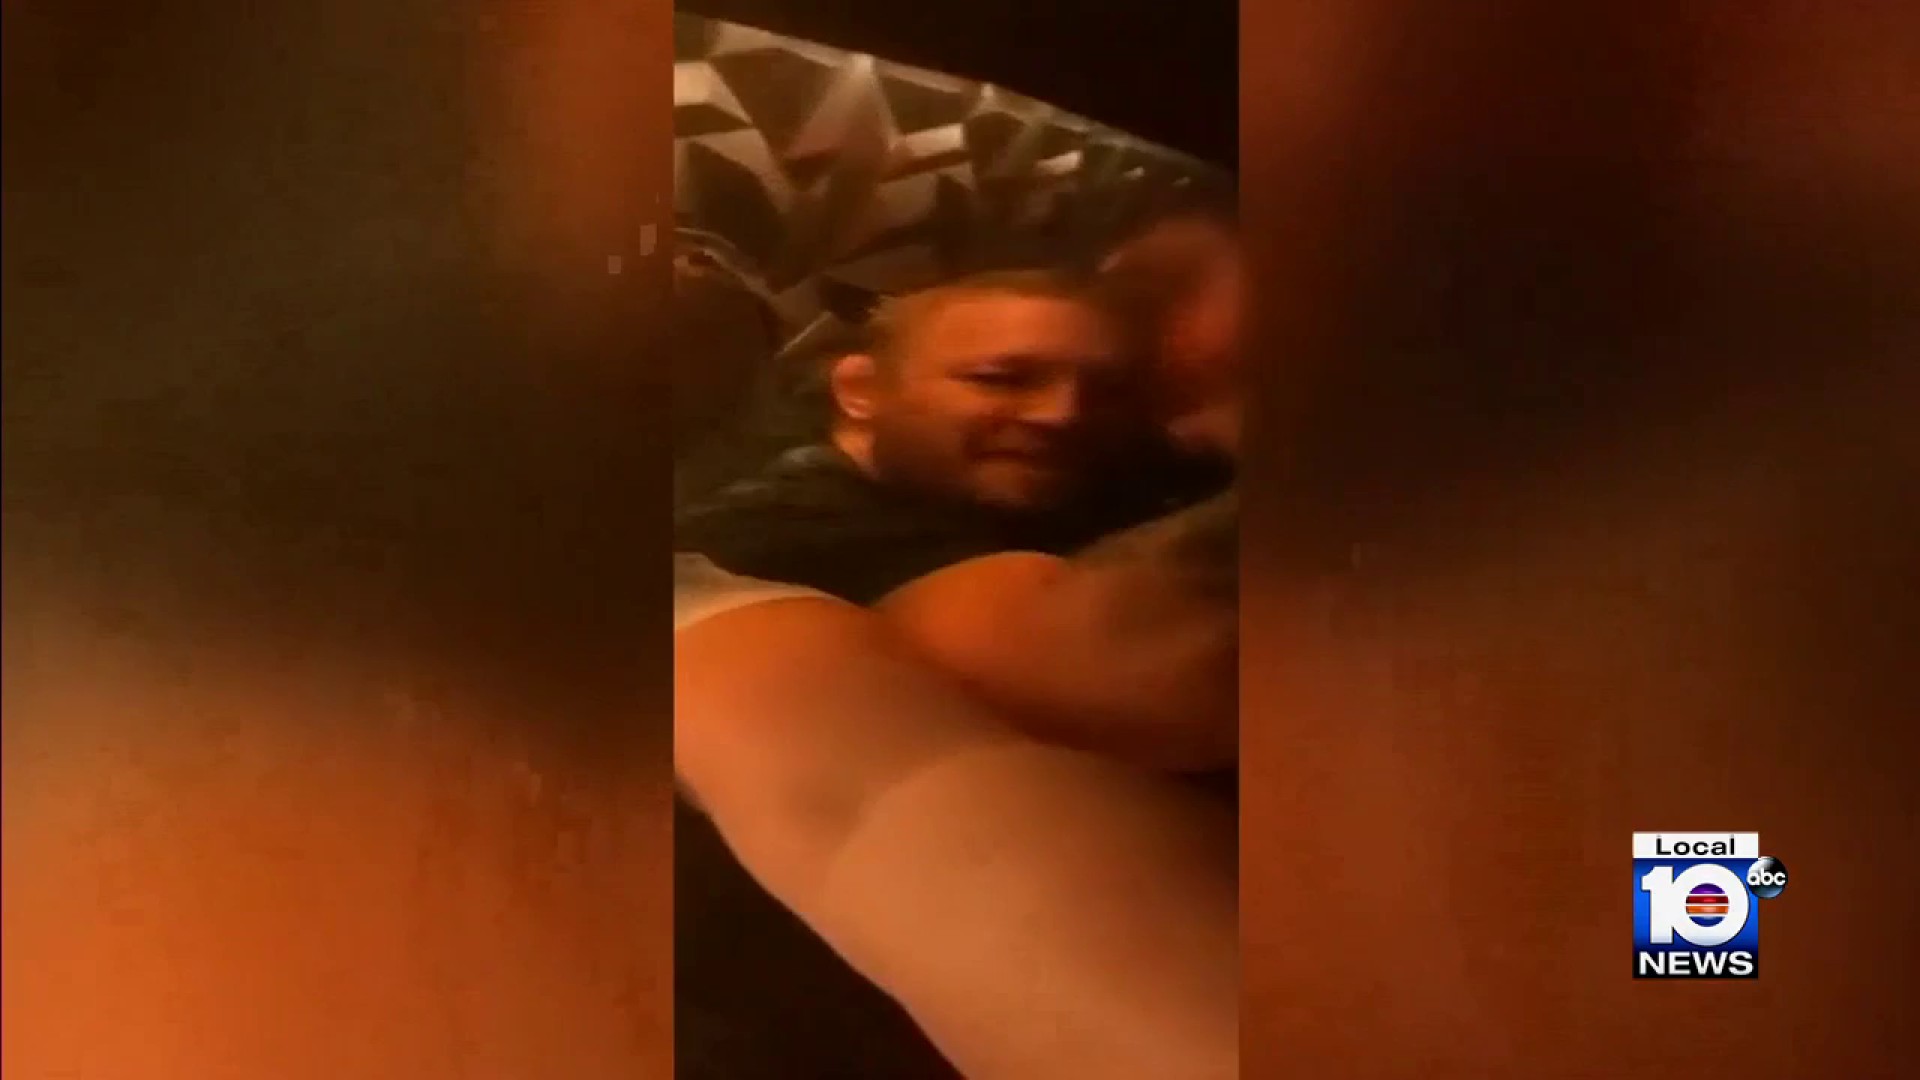 Rep Sex Video Xxx - More video surfaces of Conor McGregor with woman who alleges rape